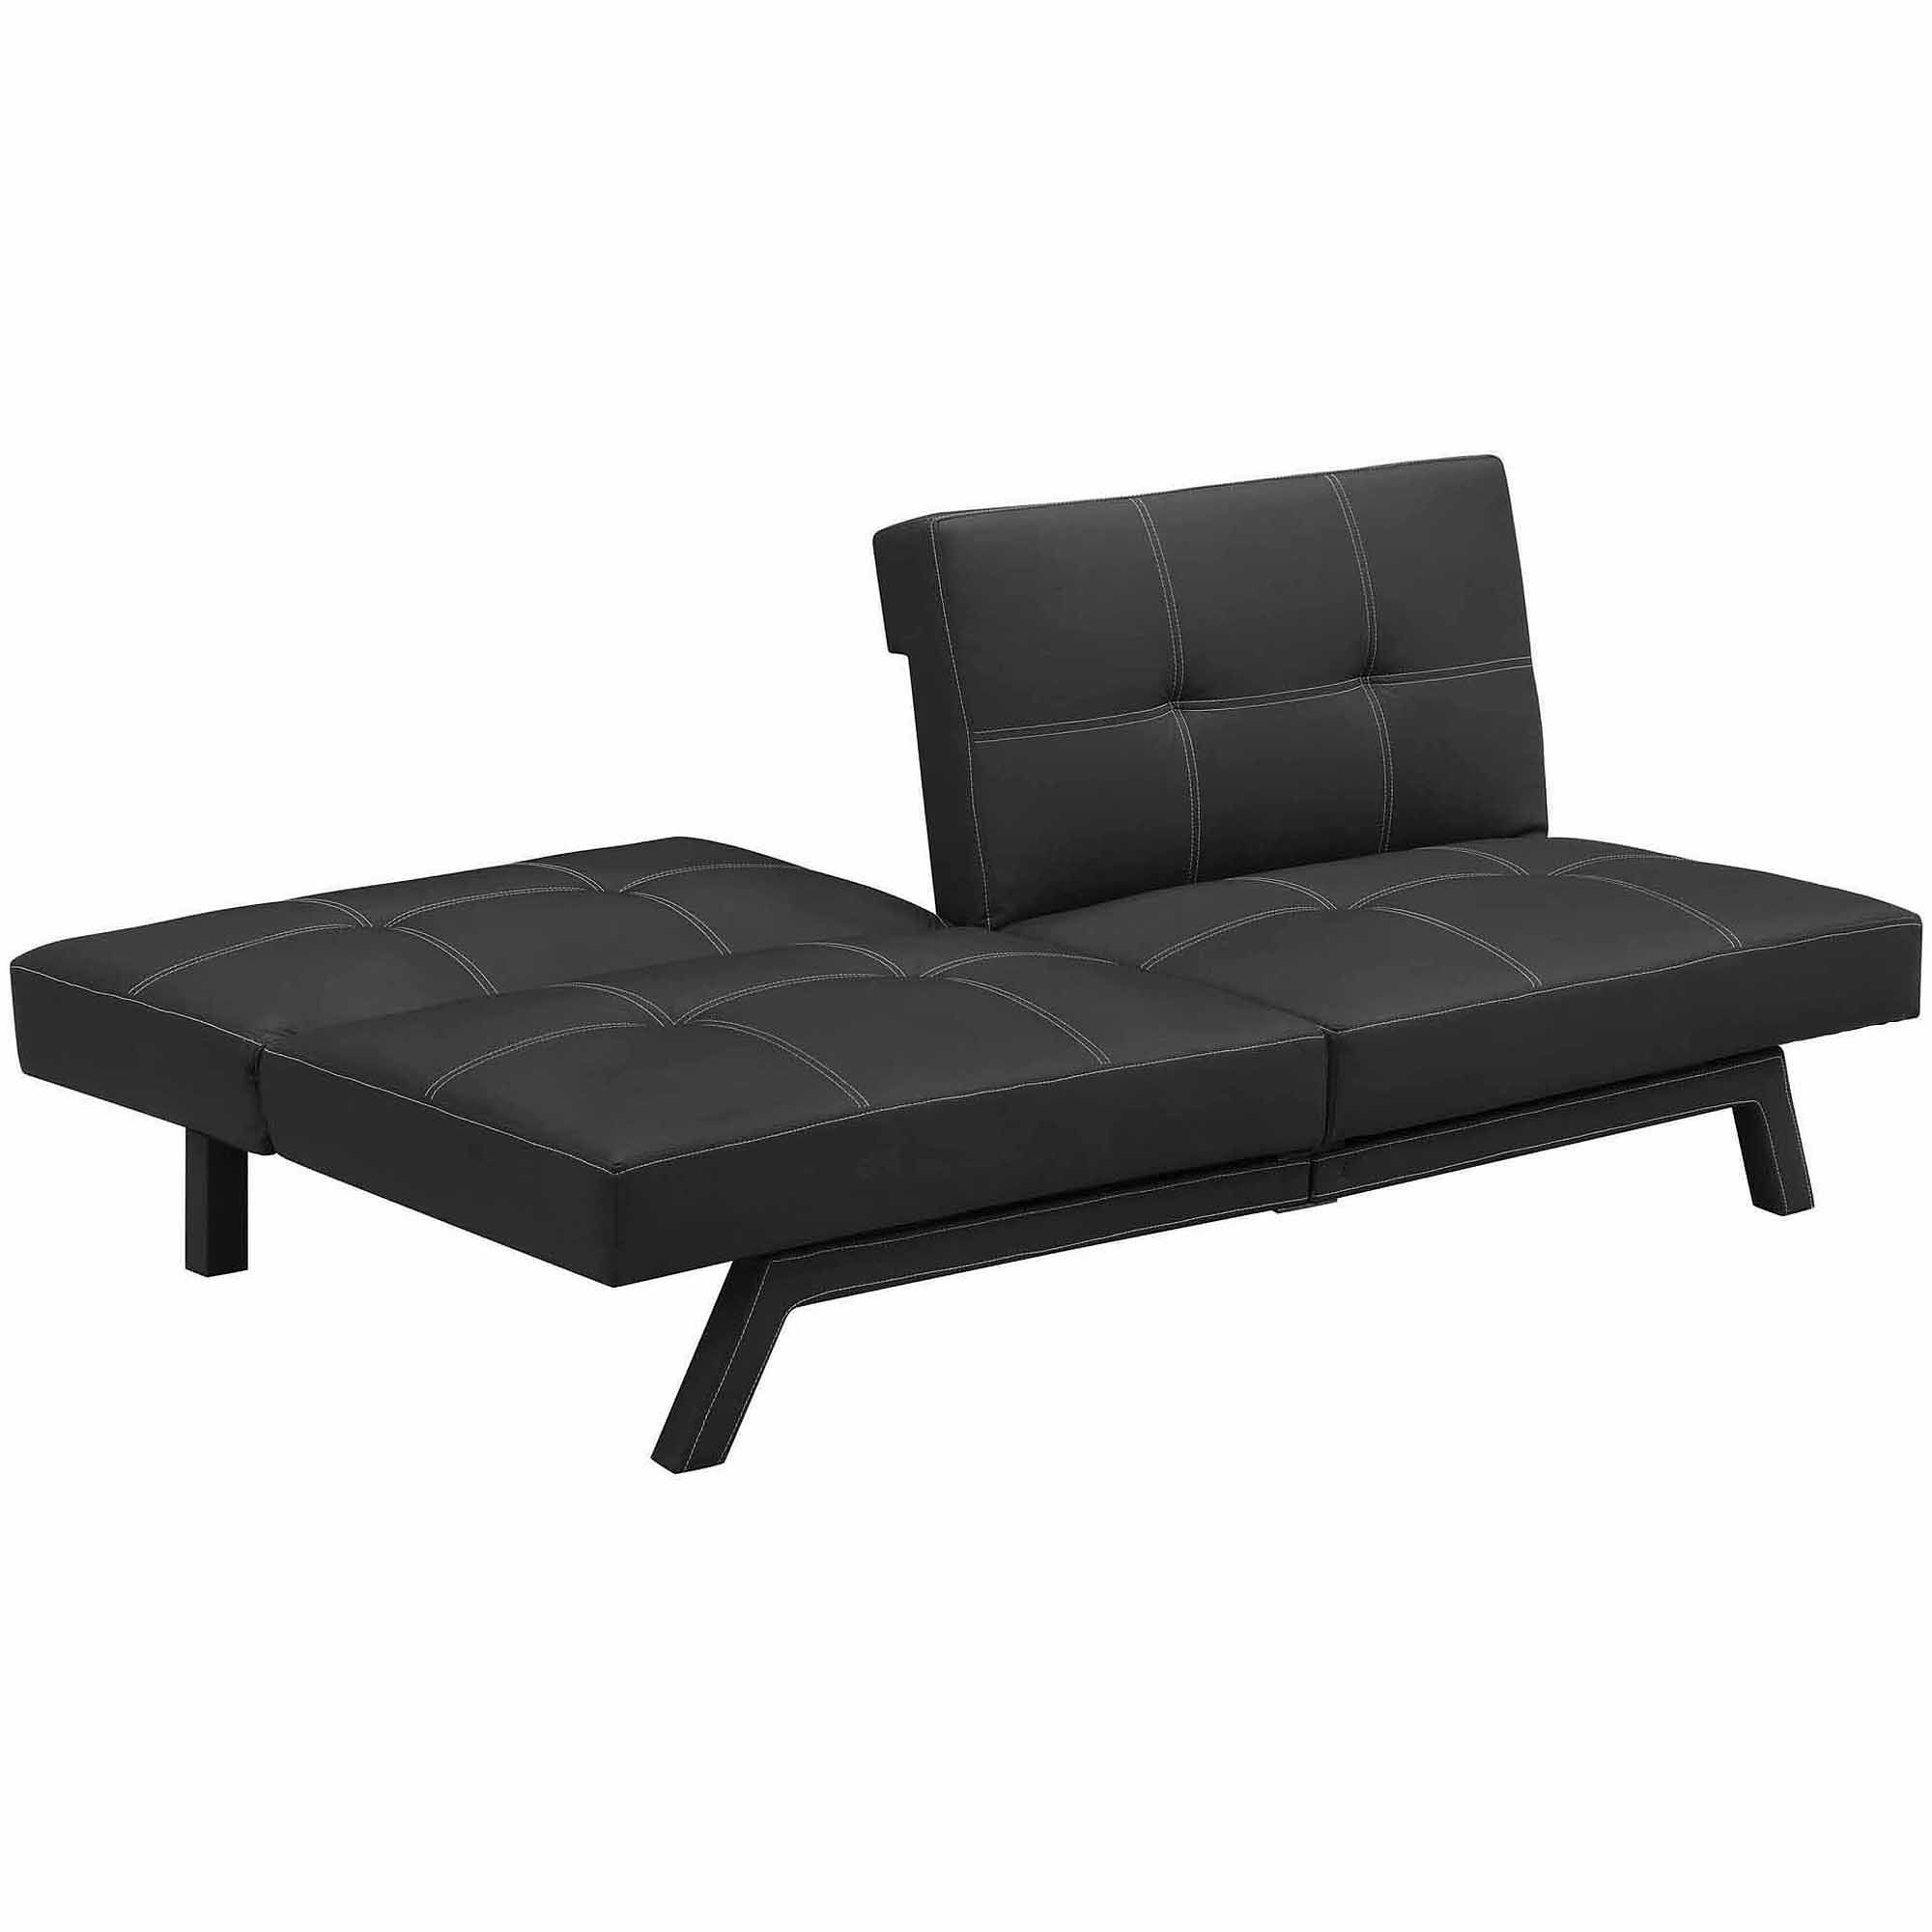 Pinsofascouch On Bedroom Sofa | Pinterest | Walmart, Bedroom In Clyde Saddle 3 Piece Power Reclining Sectionals With Power Headrest & Usb (View 29 of 30)